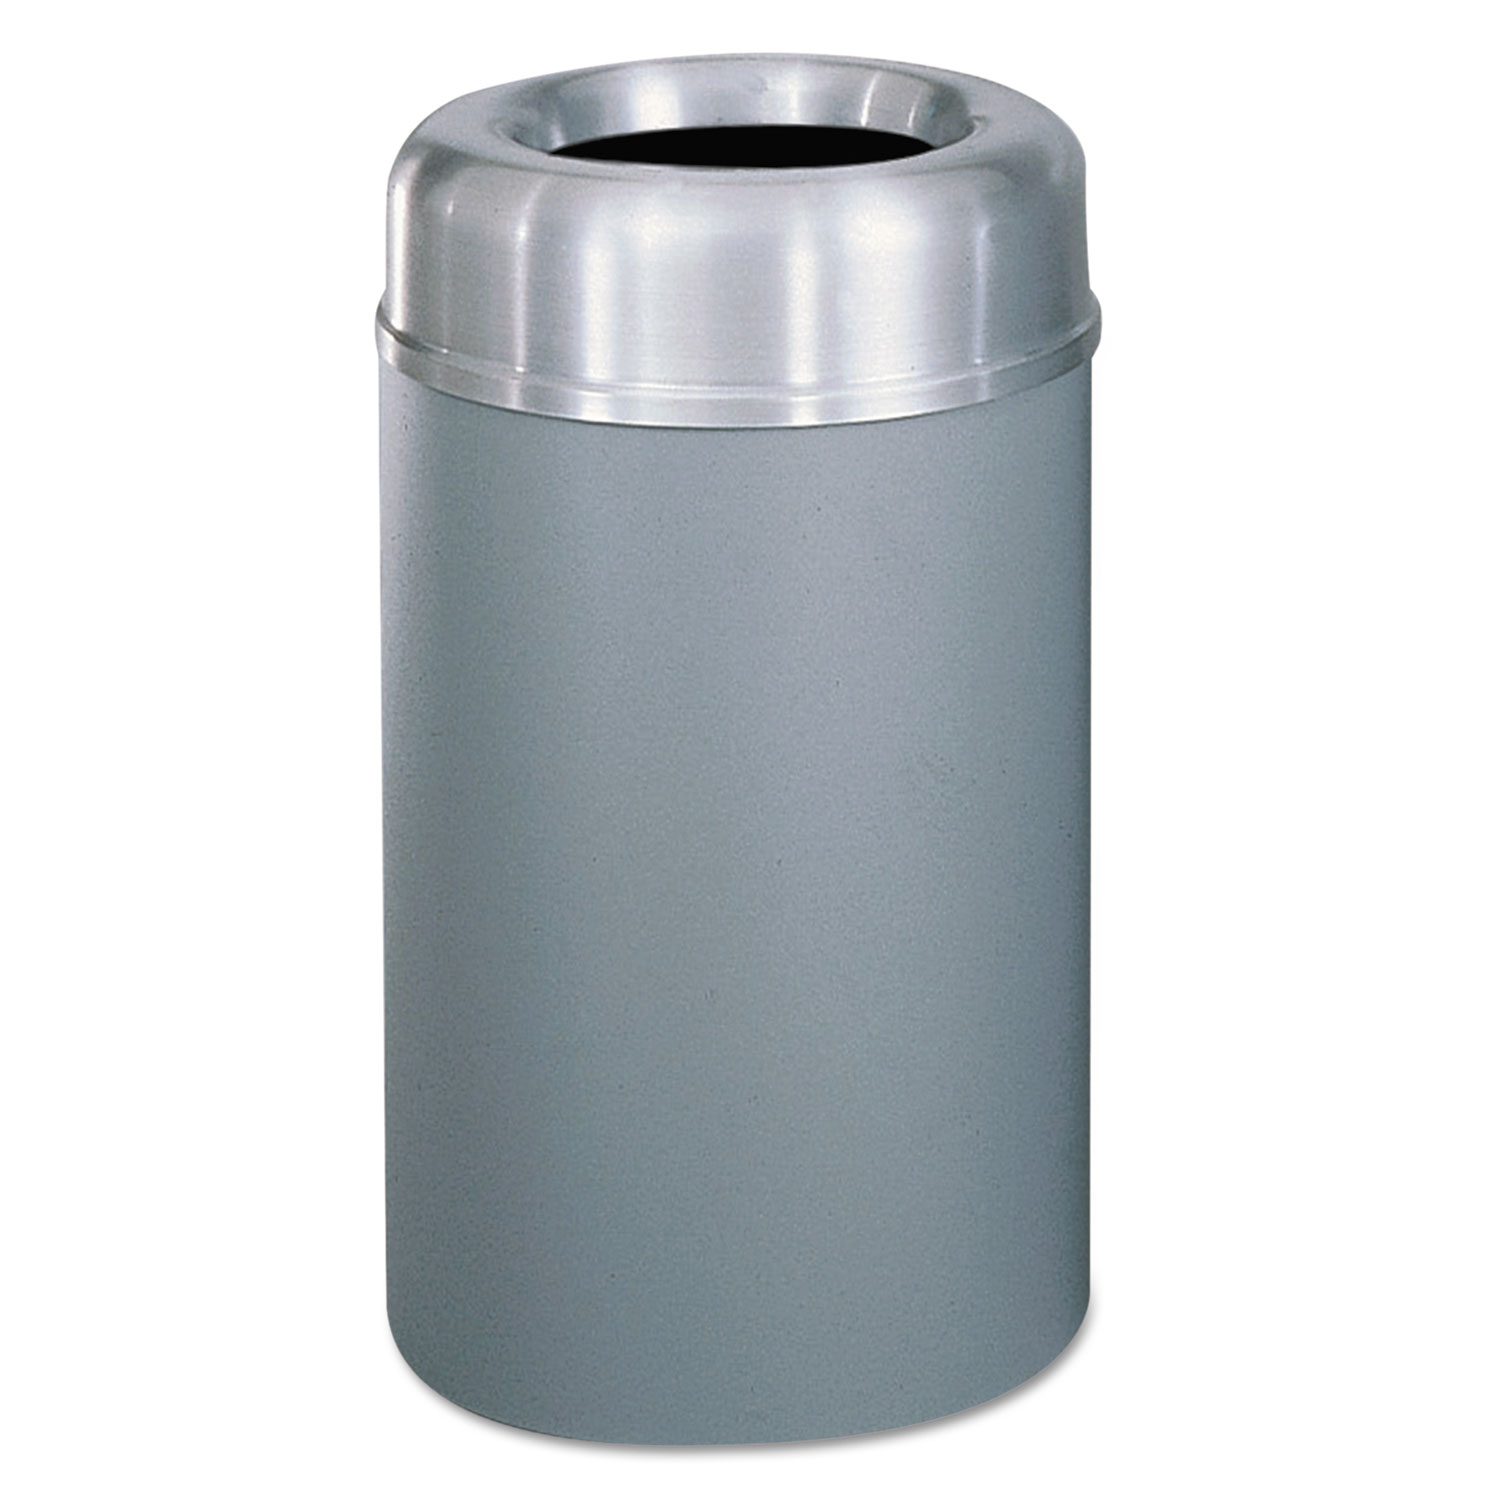 Crowne Collection Open Top Receptacle, Aluminum/Steel, 30 gallon, Silver/Gray